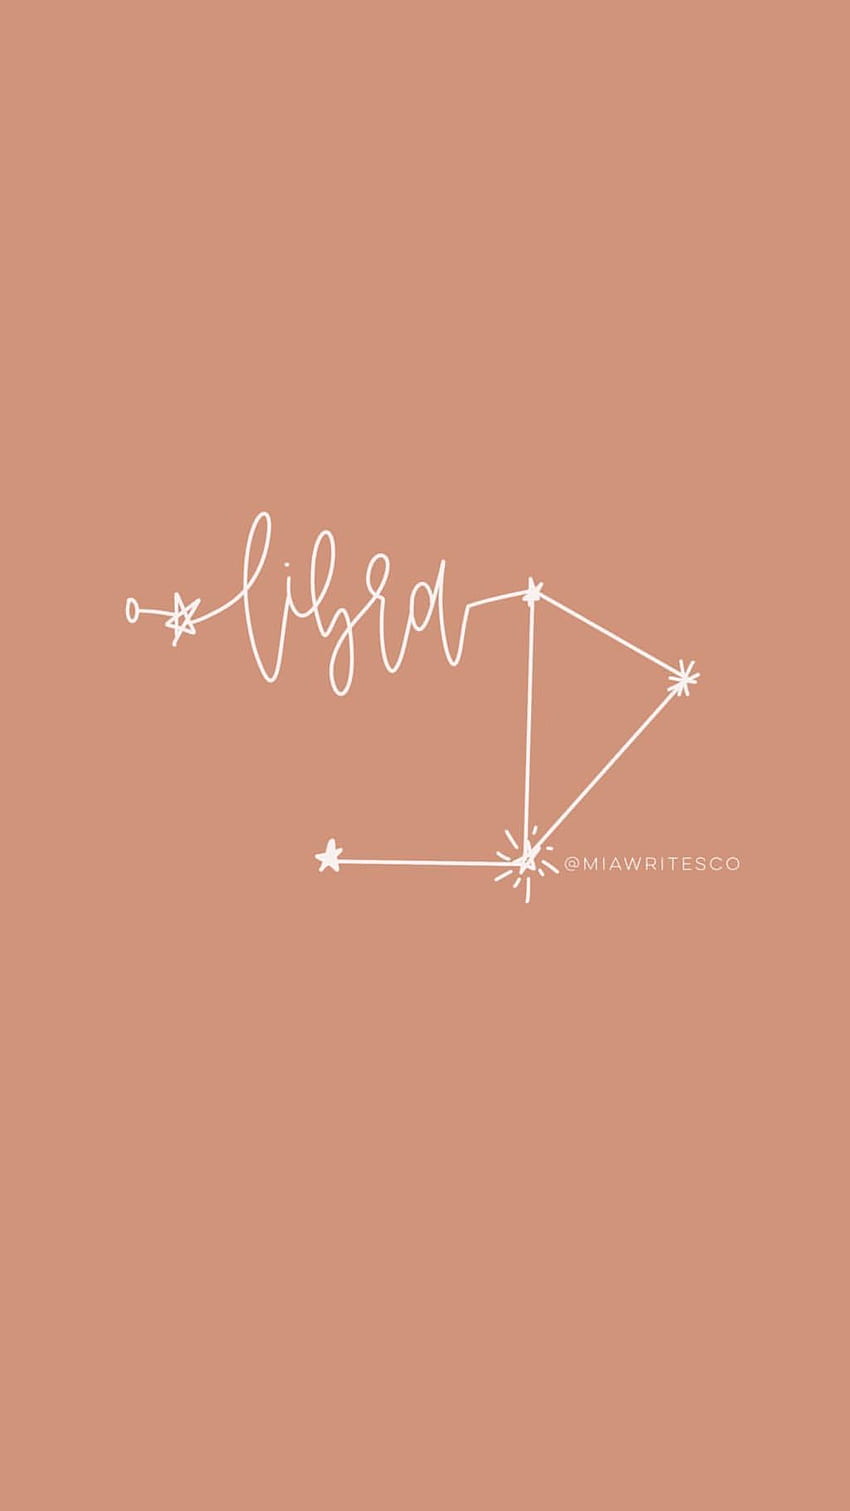 Libra Constellation Tattoo Vector Images over 900